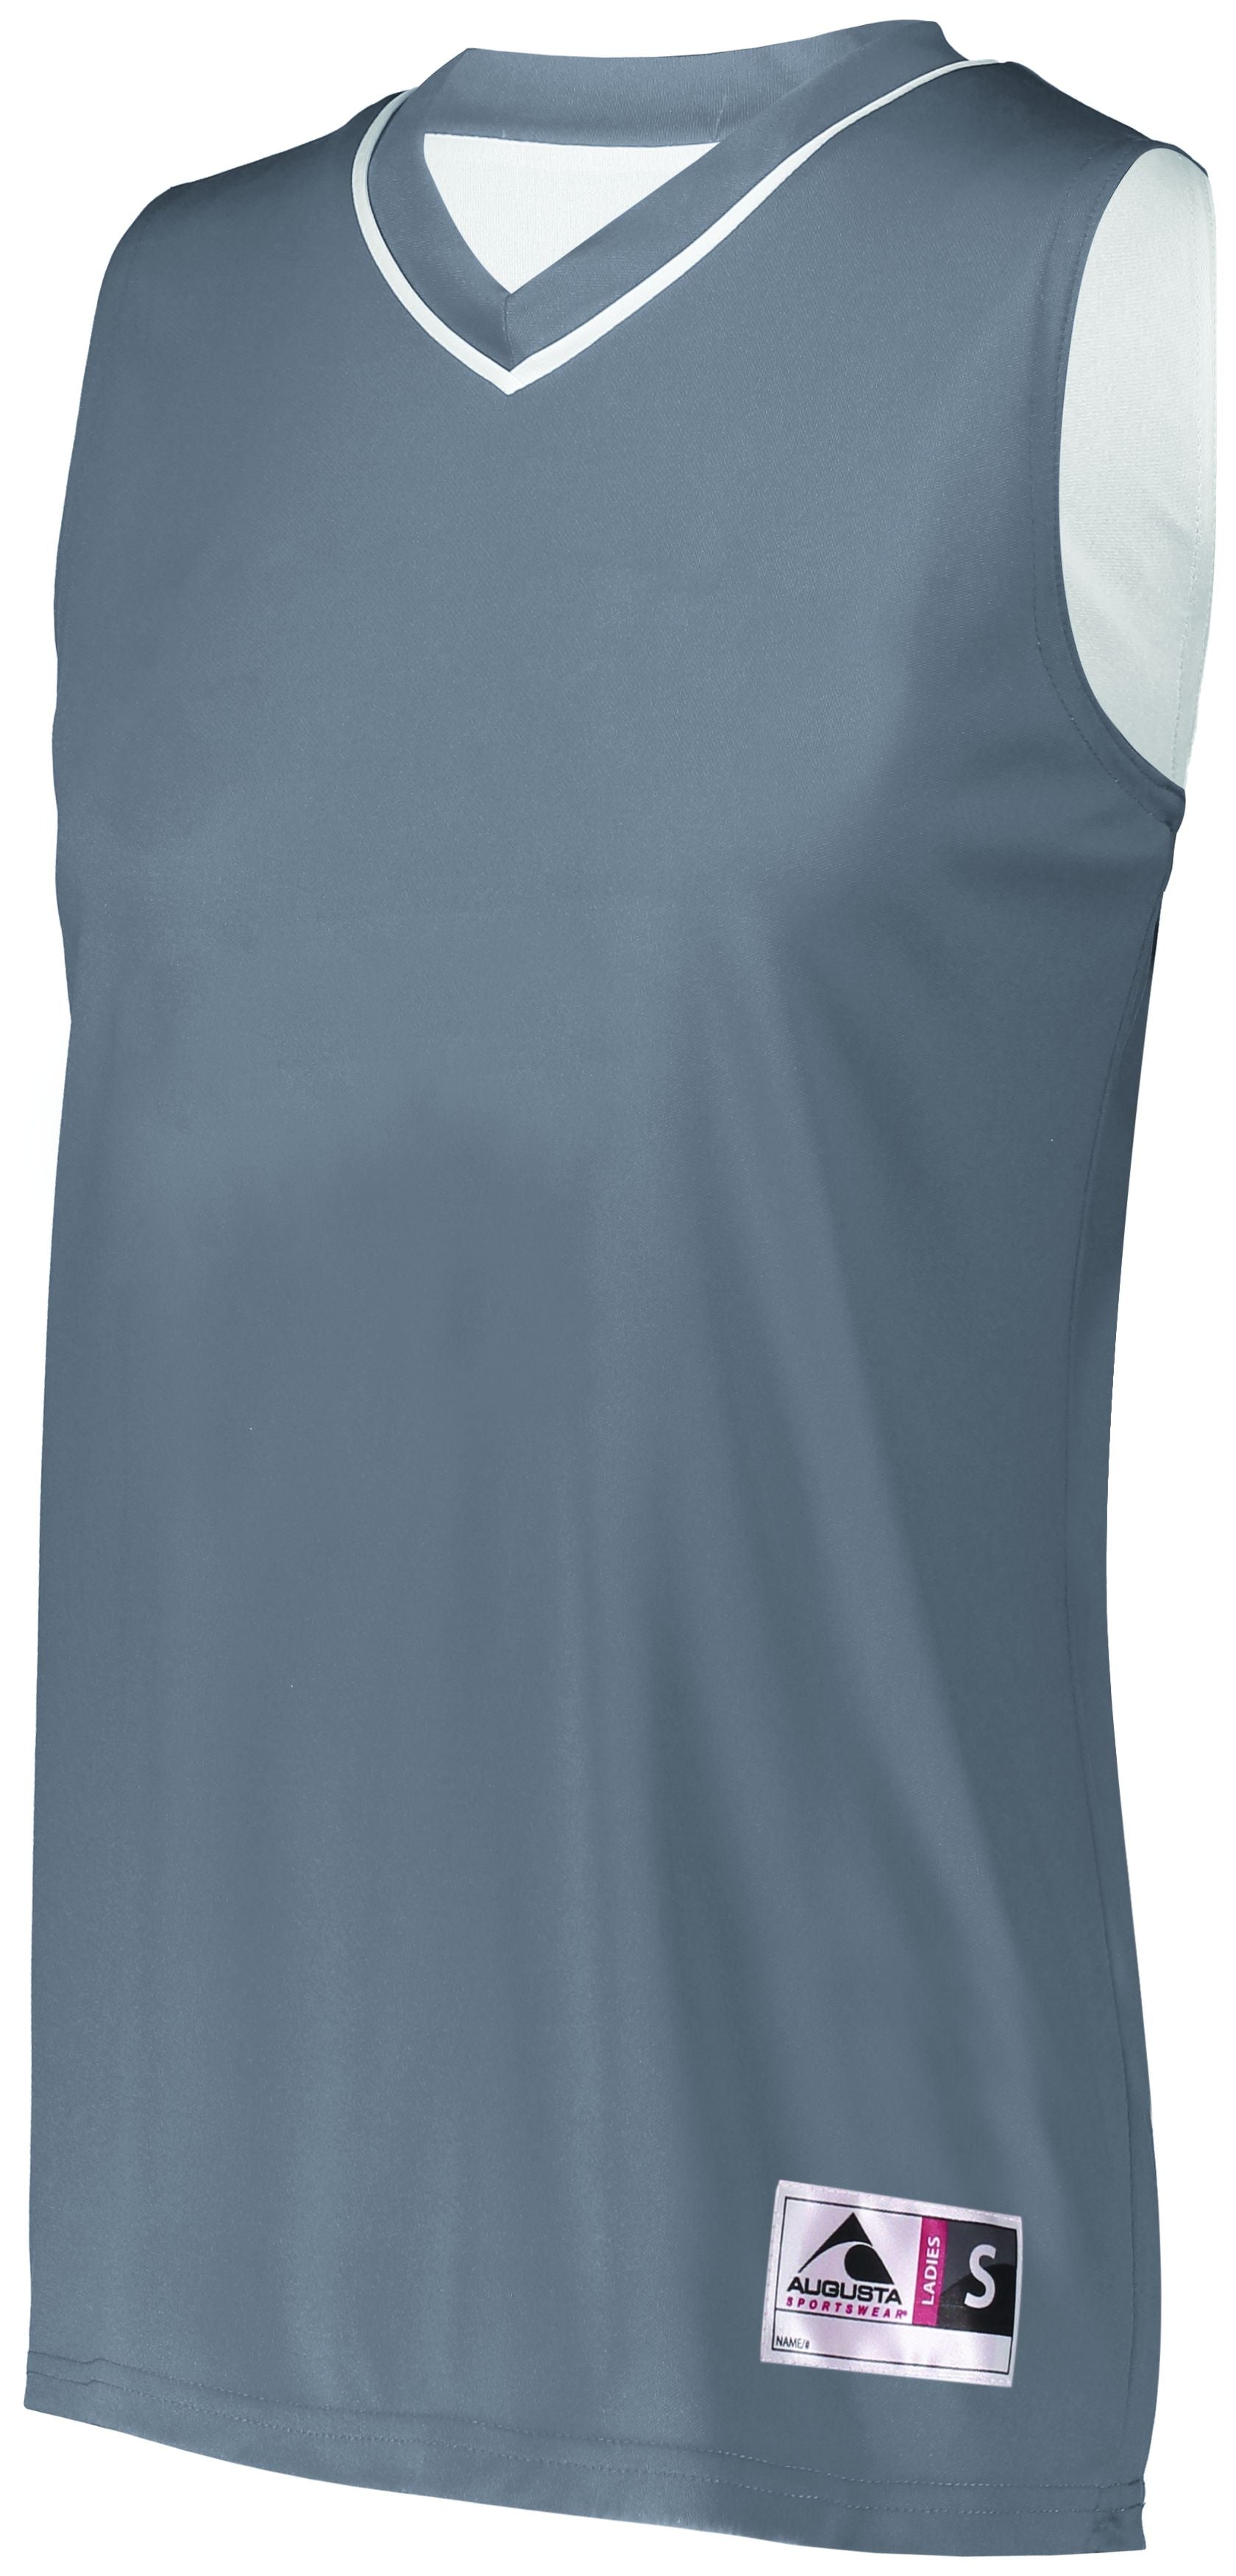 Augusta Sportswear Ladies Reversible Two-Color Jersey in Graphite/White  -Part of the Ladies, Ladies-Jersey, Augusta-Products, Basketball, Shirts, All-Sports, All-Sports-1 product lines at KanaleyCreations.com